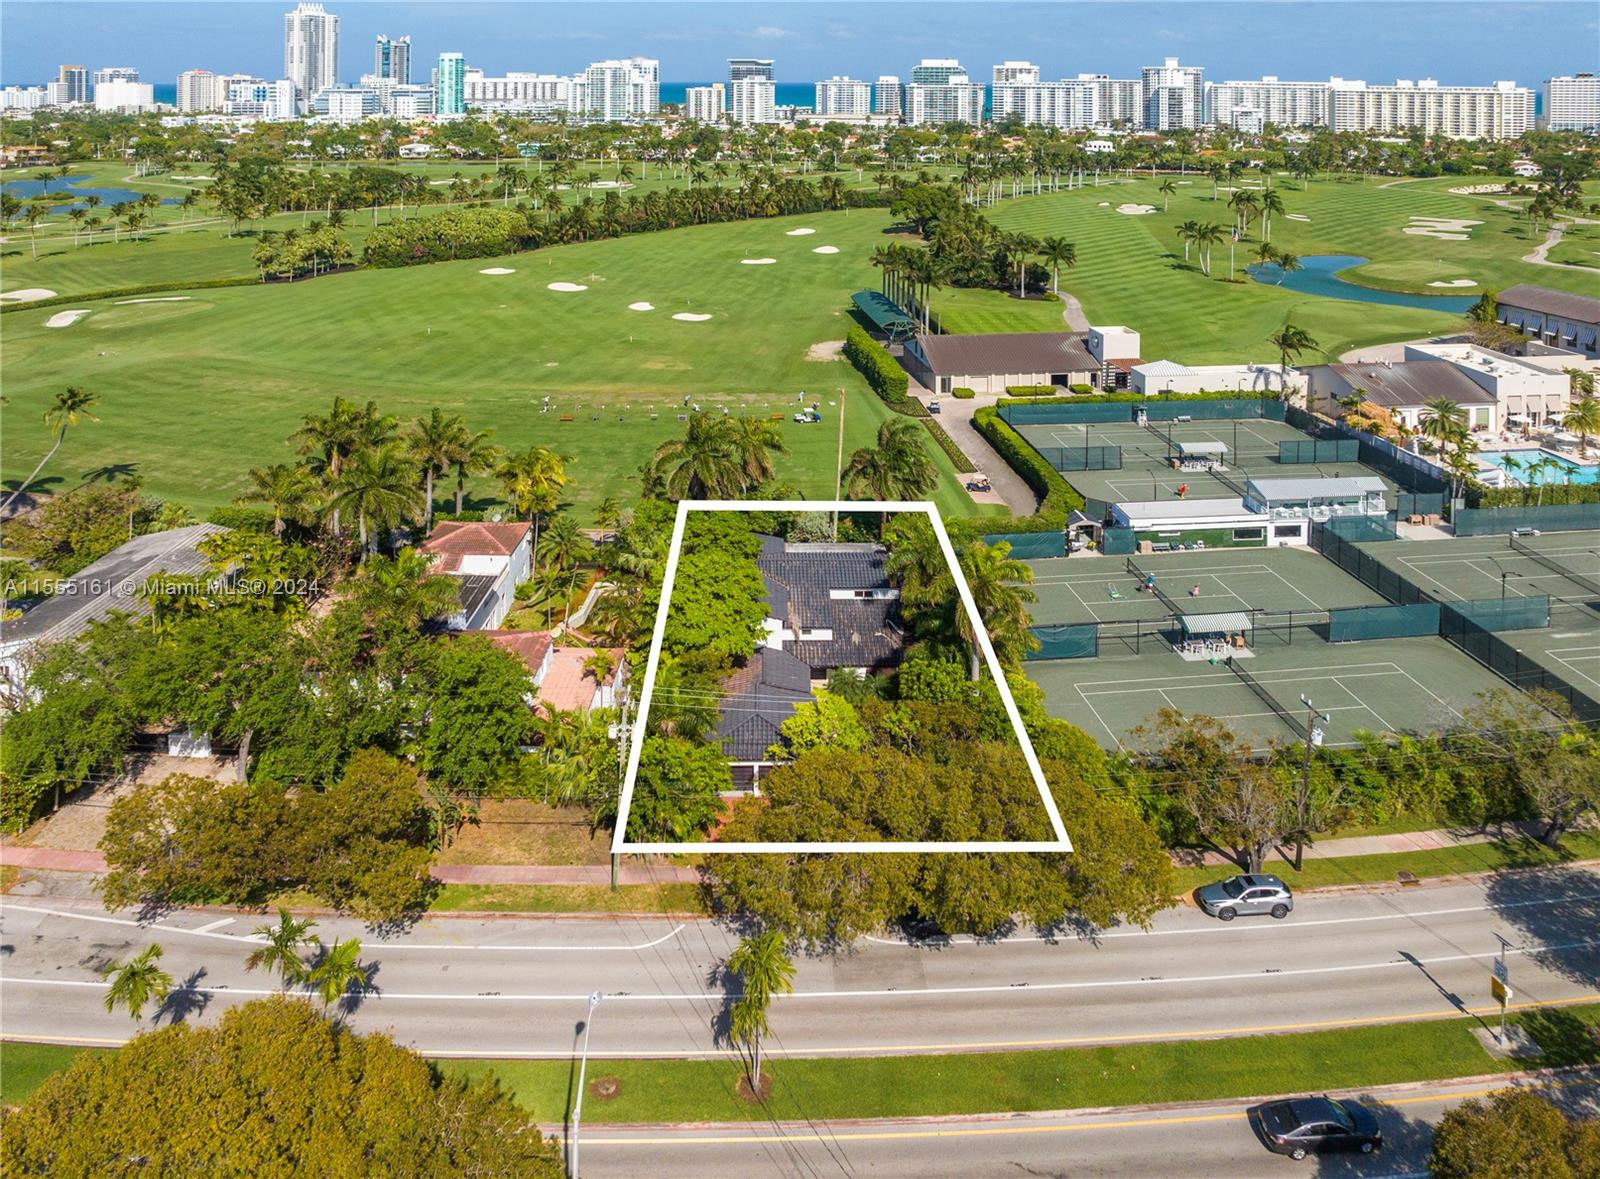 TWO STORY HOME ON THE LA GORCE COUNTRY CLUB GOLF COURSE IN THE HEART OF MIAMI BEACH. FEATURES INCLUDE: 3,762 (LIVING AREA) SF ON A 7,125 SF LOT WITH 5 BEDROOMS, 5 BATHROOMS, CHARMING GREAT ROOM, FLORIDA ROOM, FORMAL DINING ROOM, ENORMOUS MASTER SUITE. PROPERTY IS BEING SOLD AS IS.